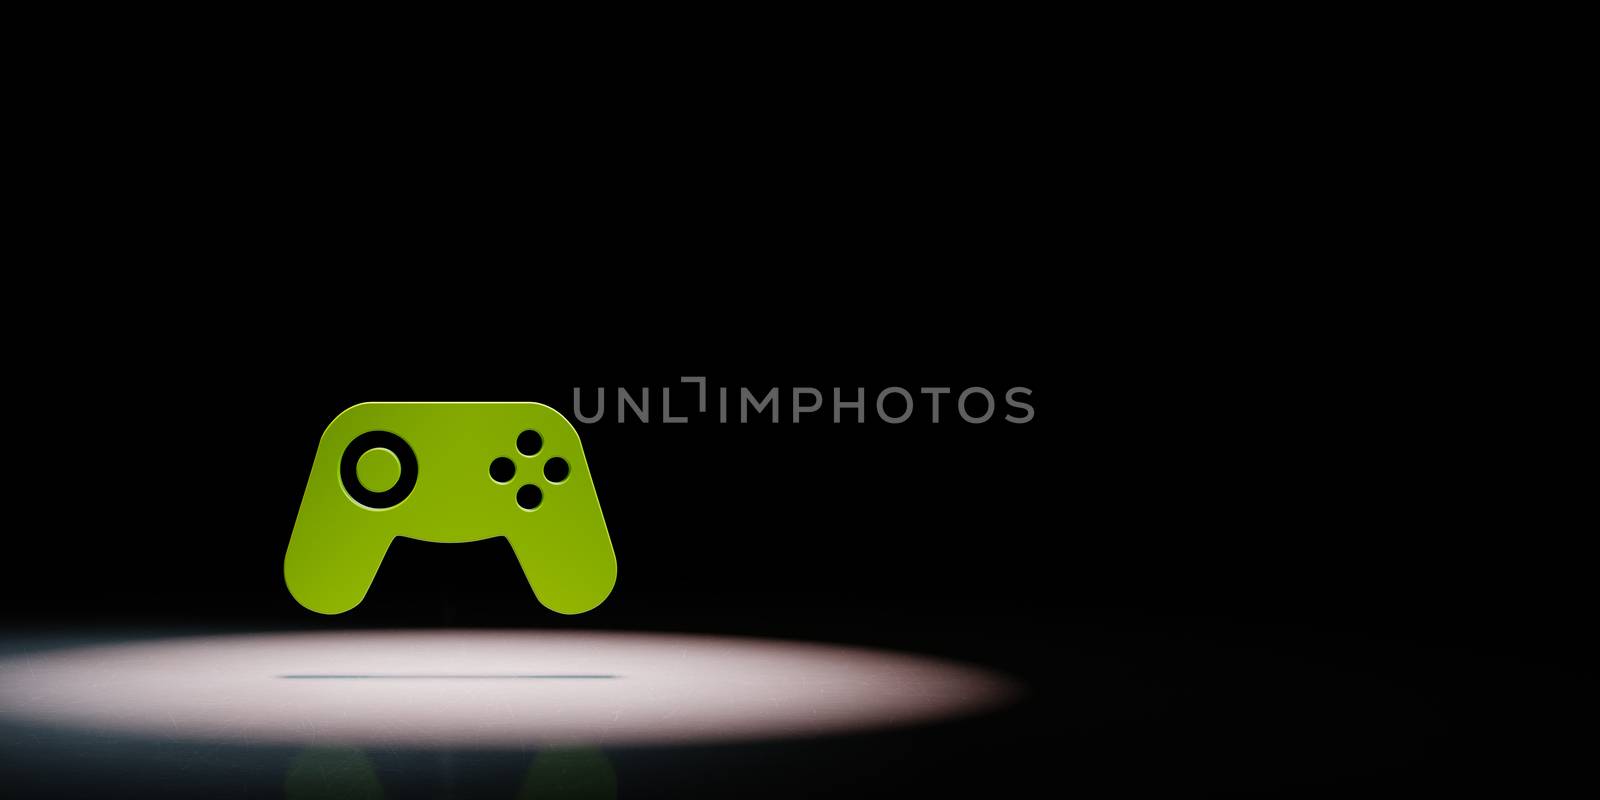 Green Gamepad Controller 3D Symbol Shape Spotlighted on Black Background with Copy Space 3D Illustration